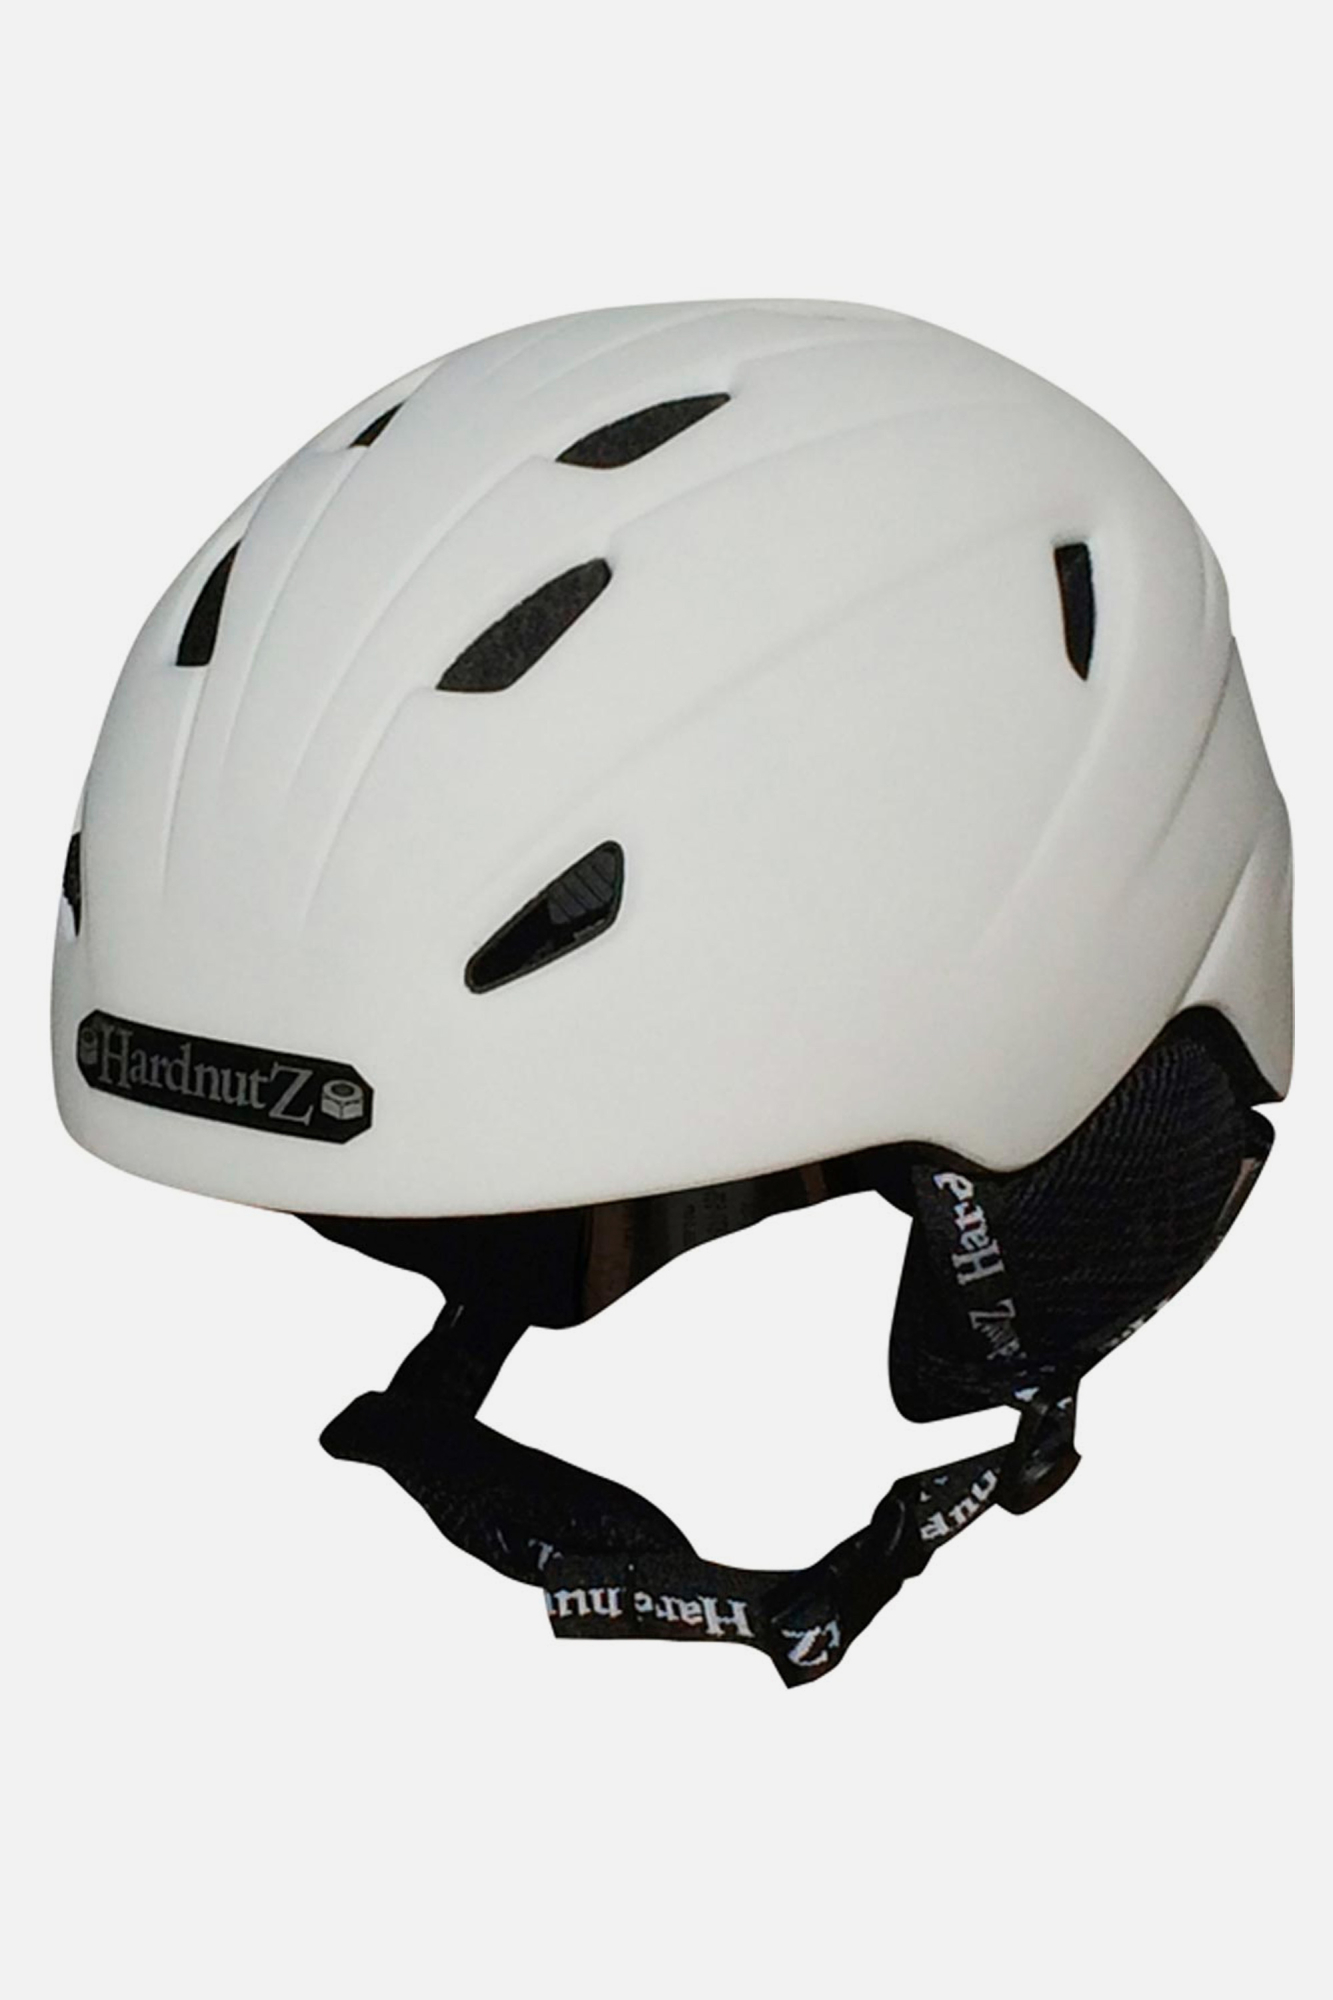 Hardnutz Rubber In Mould Helmet White - Size: Large